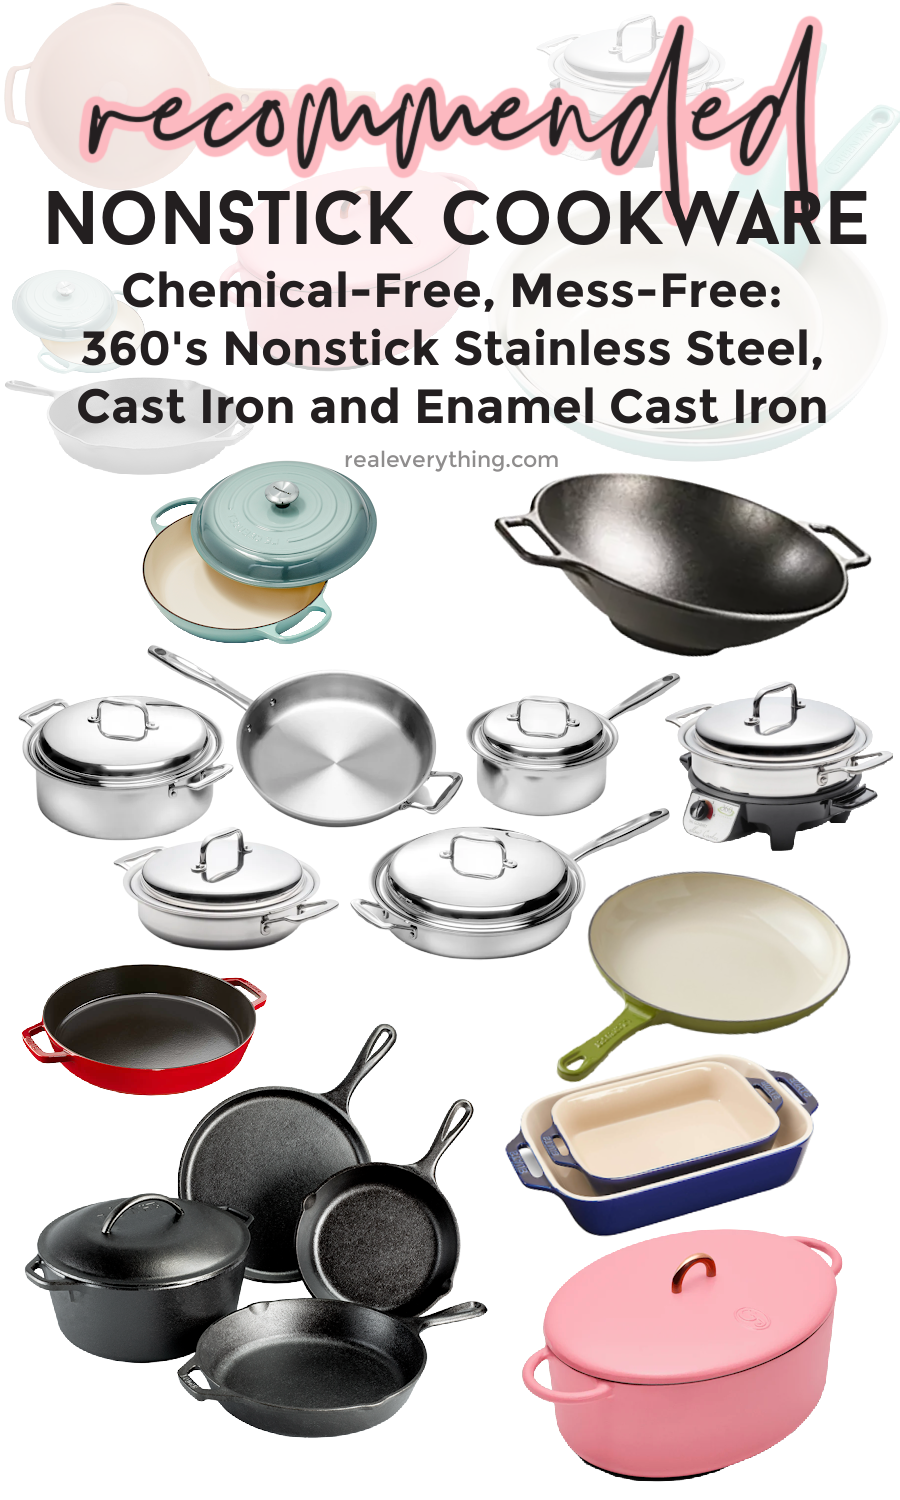 Nontoxic Nonstick Cookware: Chemical-Free, Mess-Free Pots and Pans